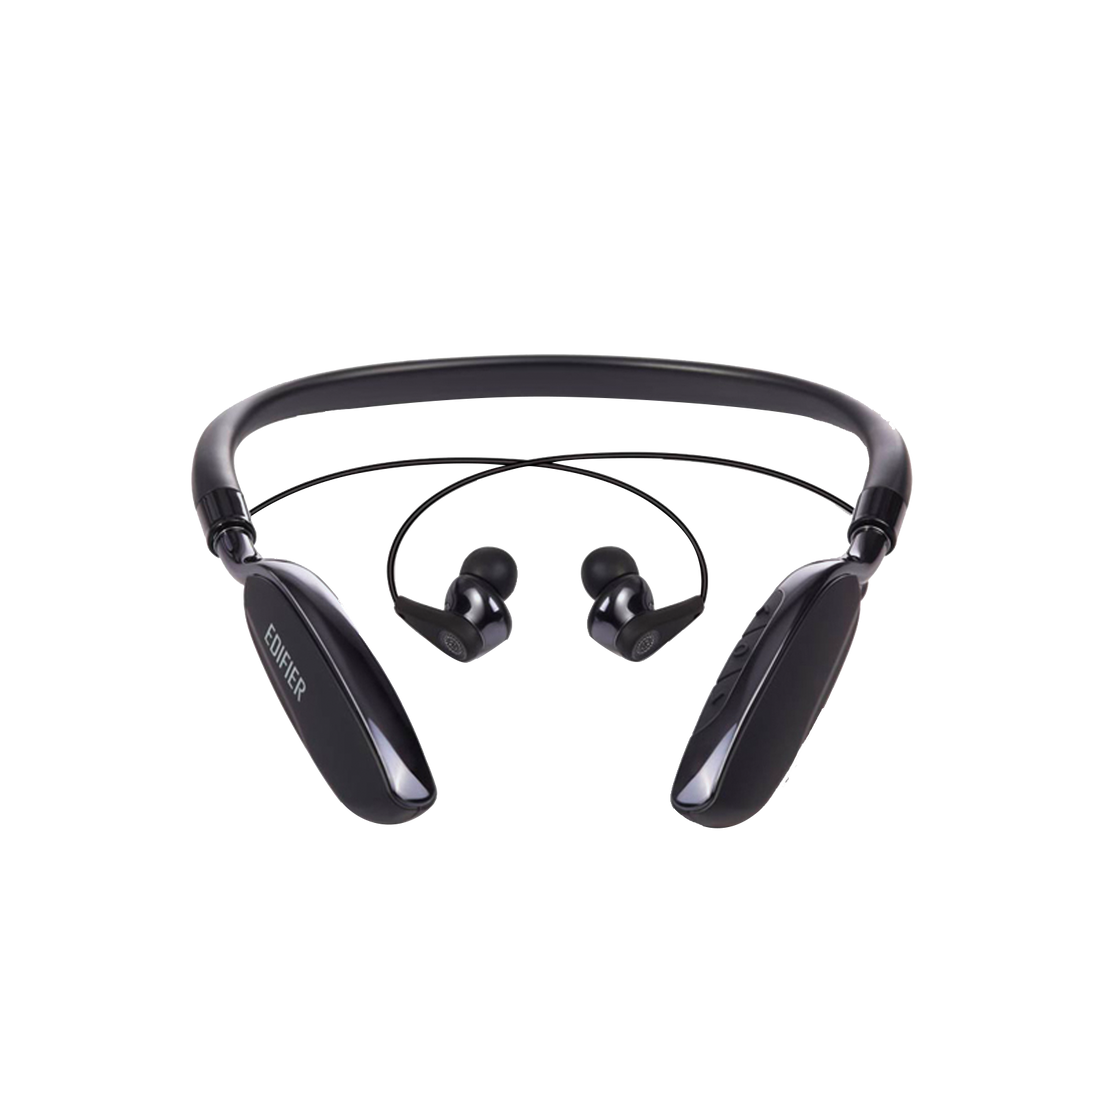 W360NB Active Noise Cancelling Bluetooth Headphones